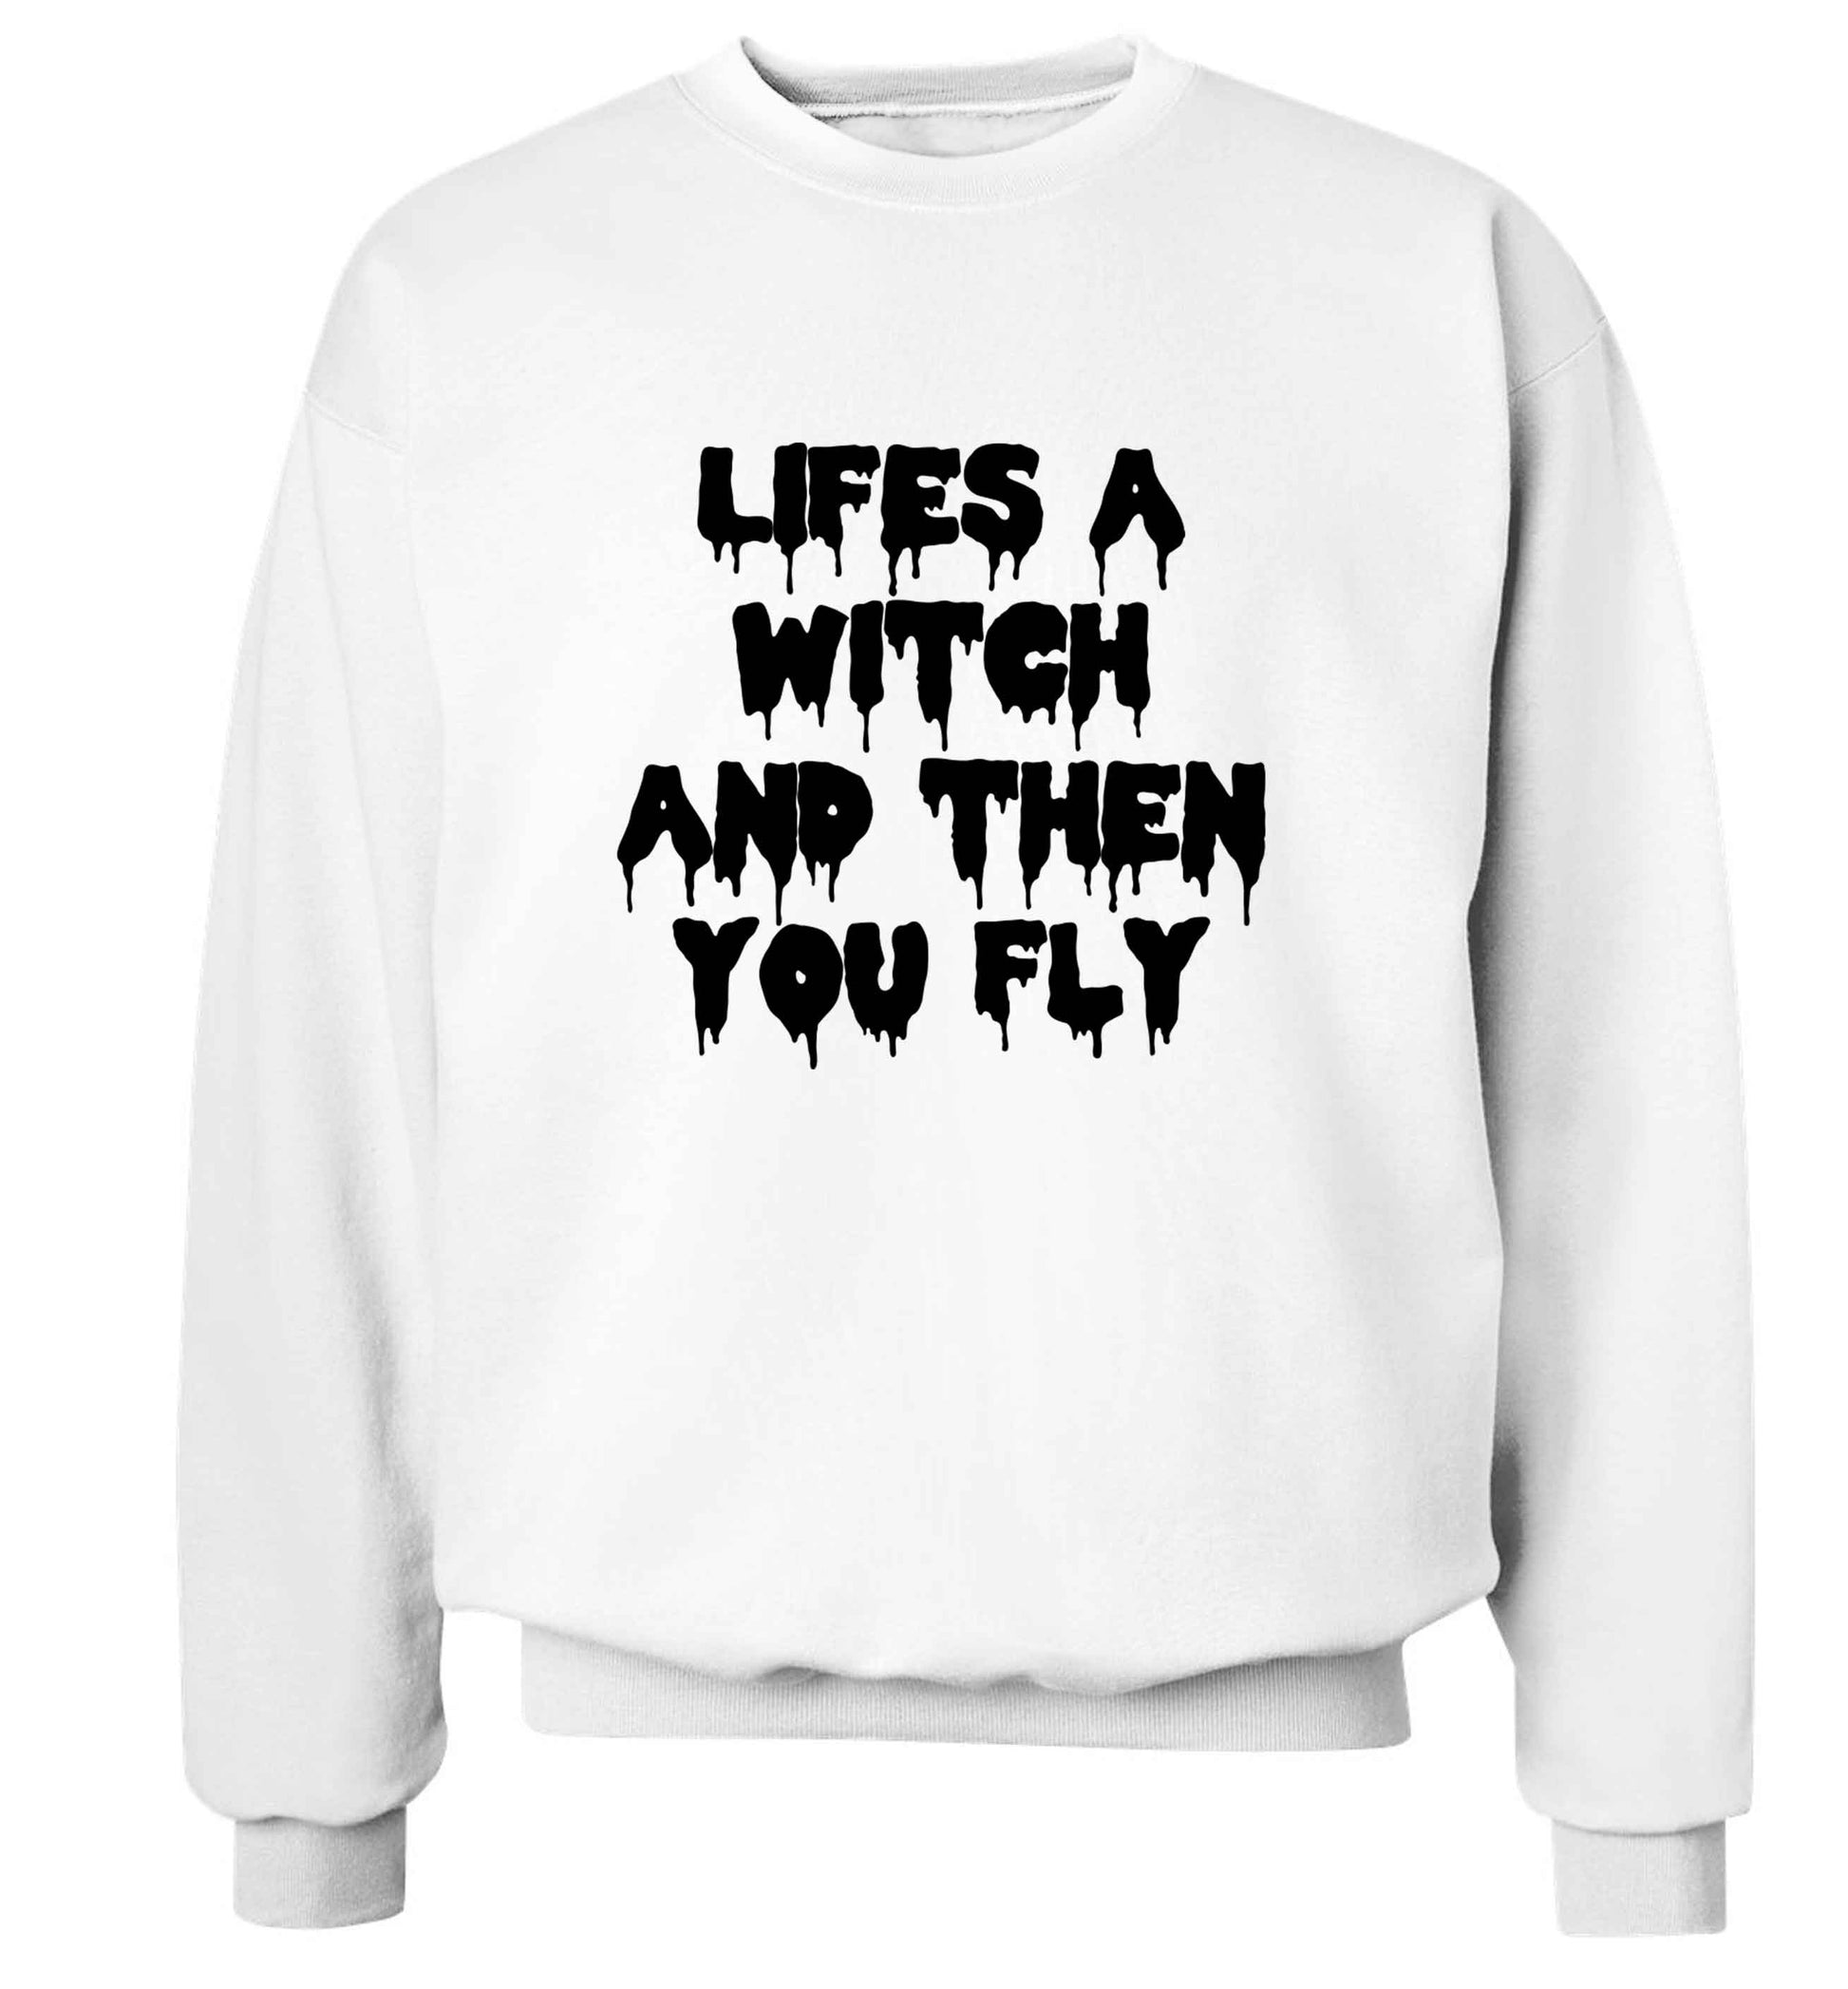 Life's a witch and then you fly adult's unisex white sweater 2XL